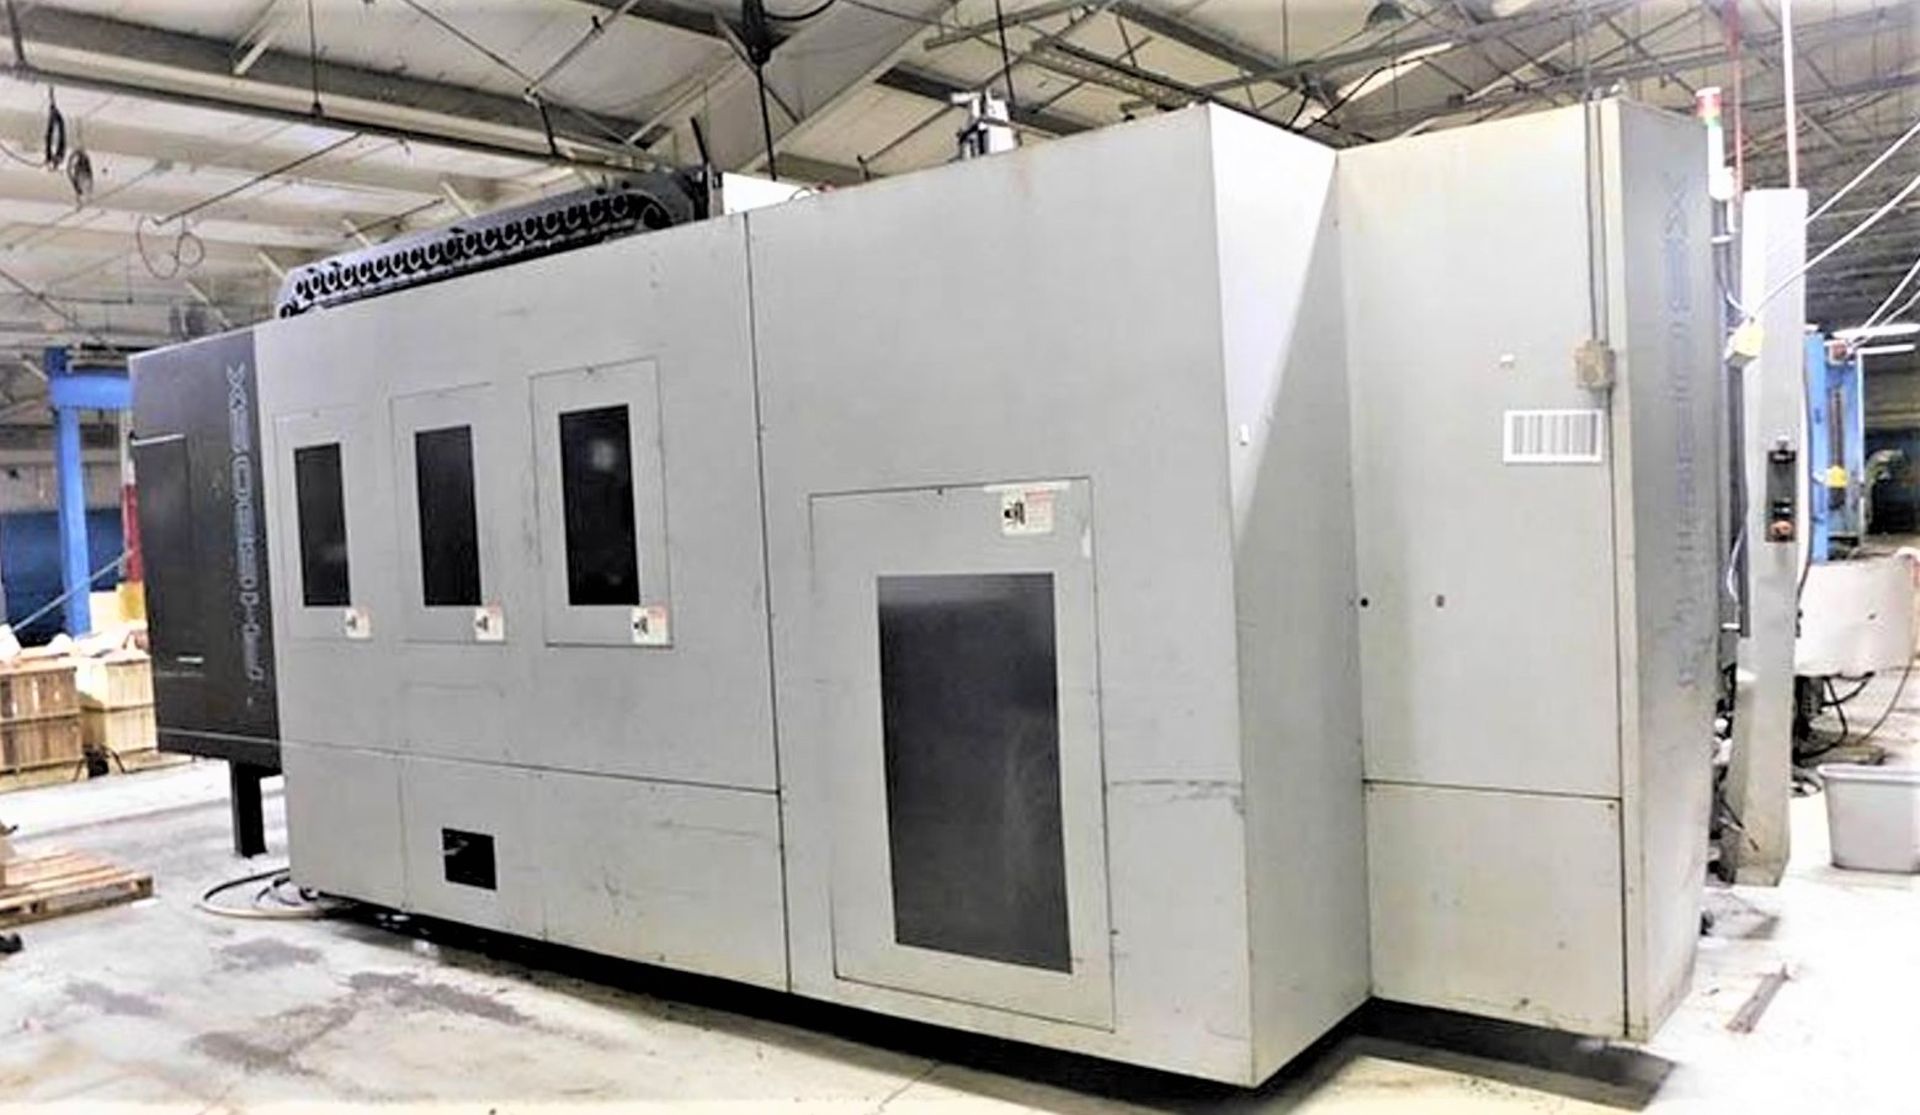 24.8" X 24.8" Pallets Toyoda FH630SX CNC 4-Axis Horizontal Machining Center, S/N NS1429, New 2006 - Image 8 of 10